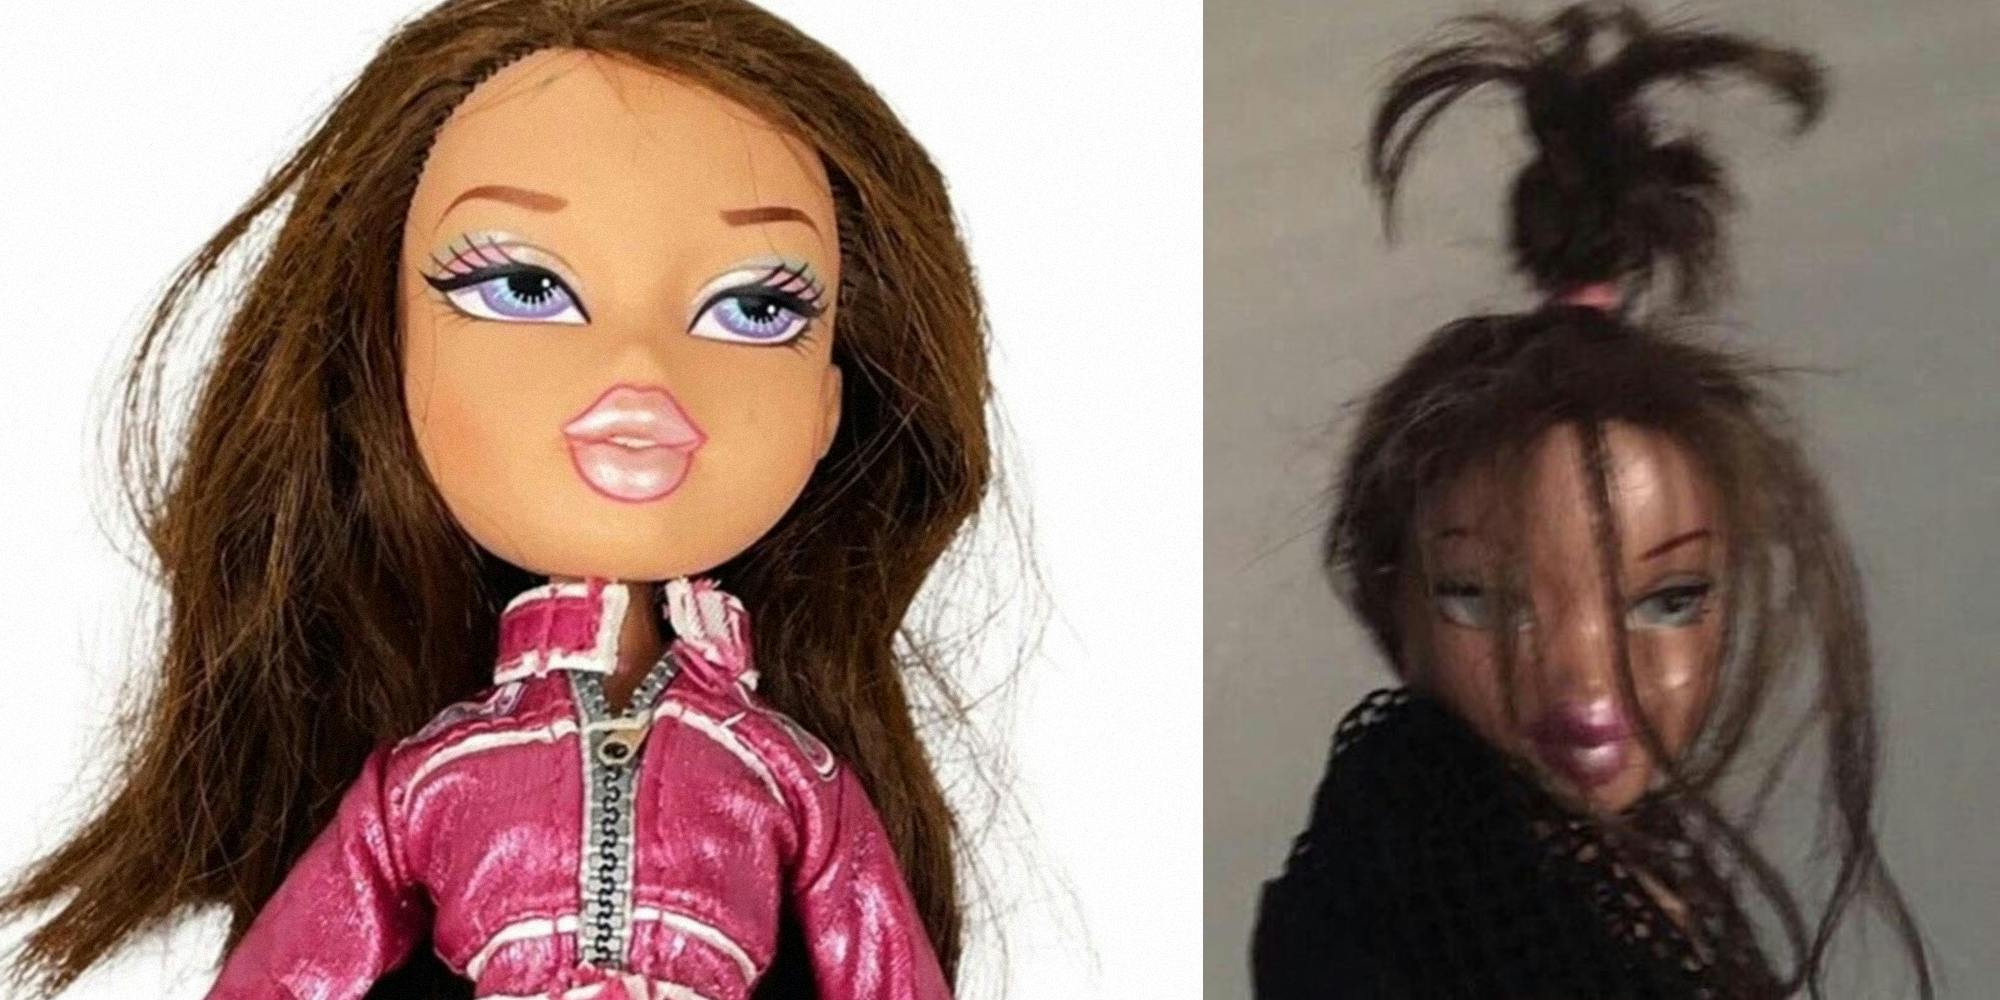 Bratz doll as advertised (l) Bratz doll with hair pulled up into topknot (r)